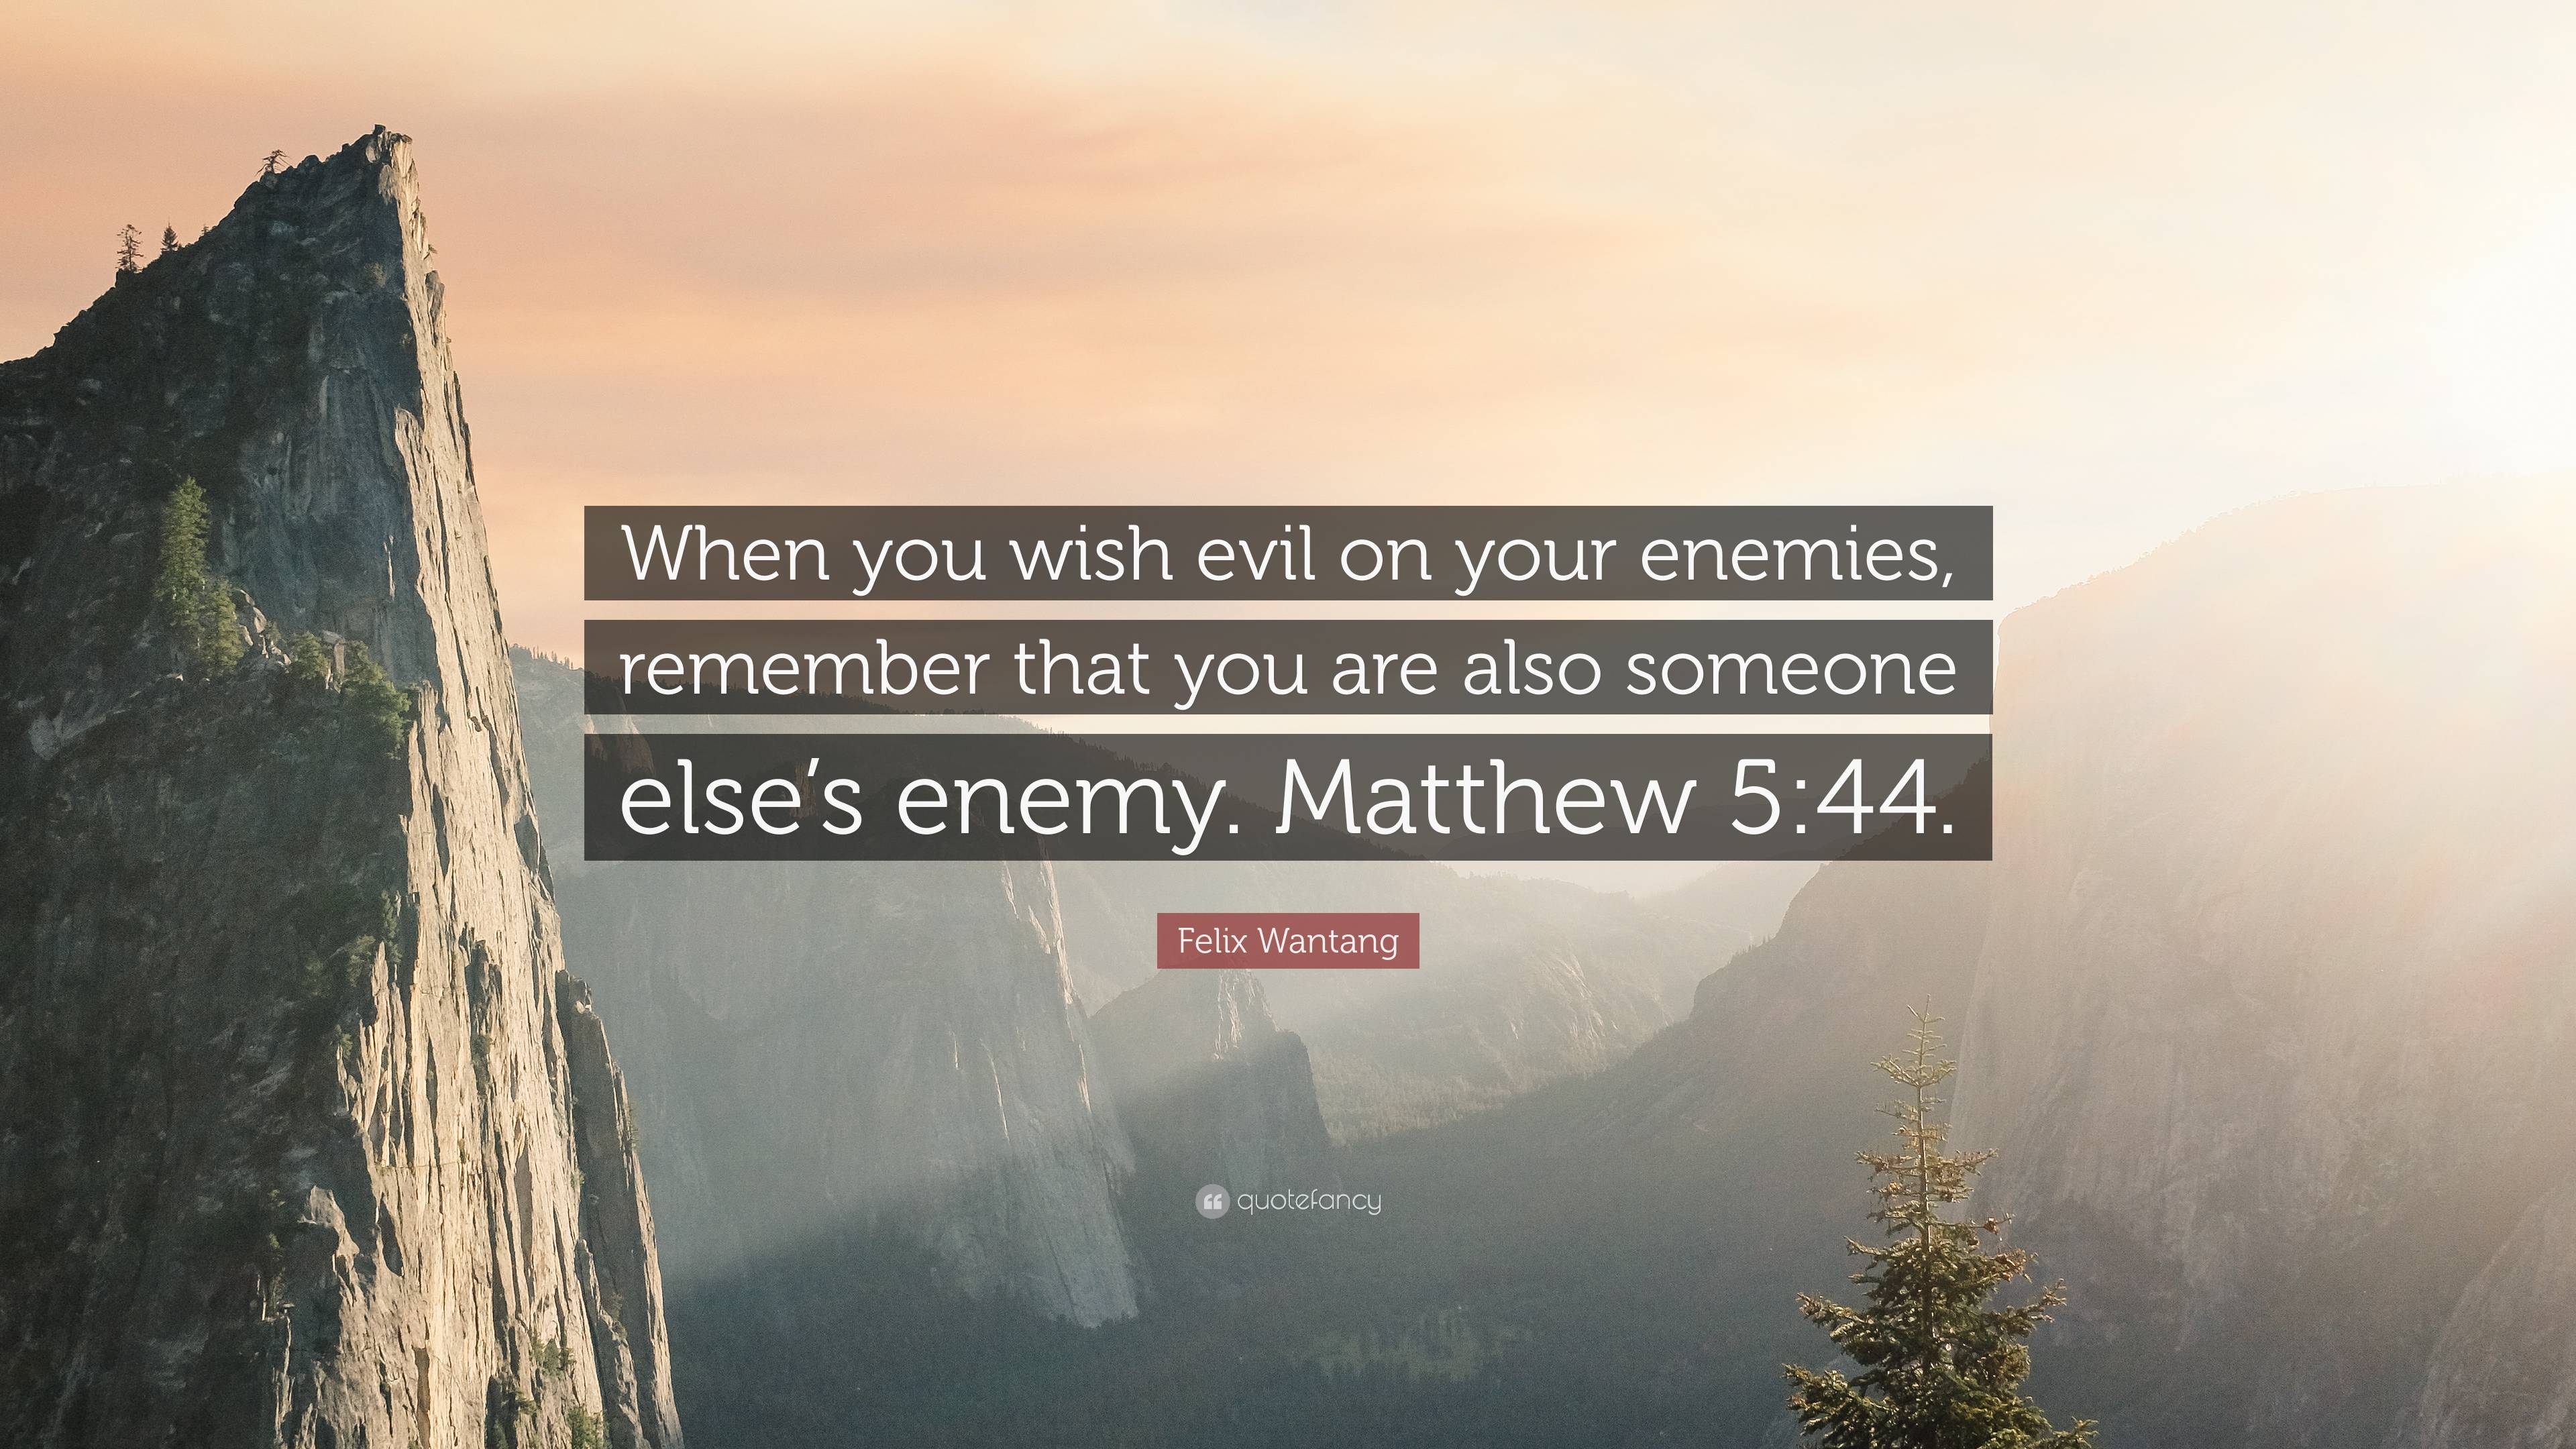 Felix Wantang Quote: “When you wish evil on your enemies, remember that ...